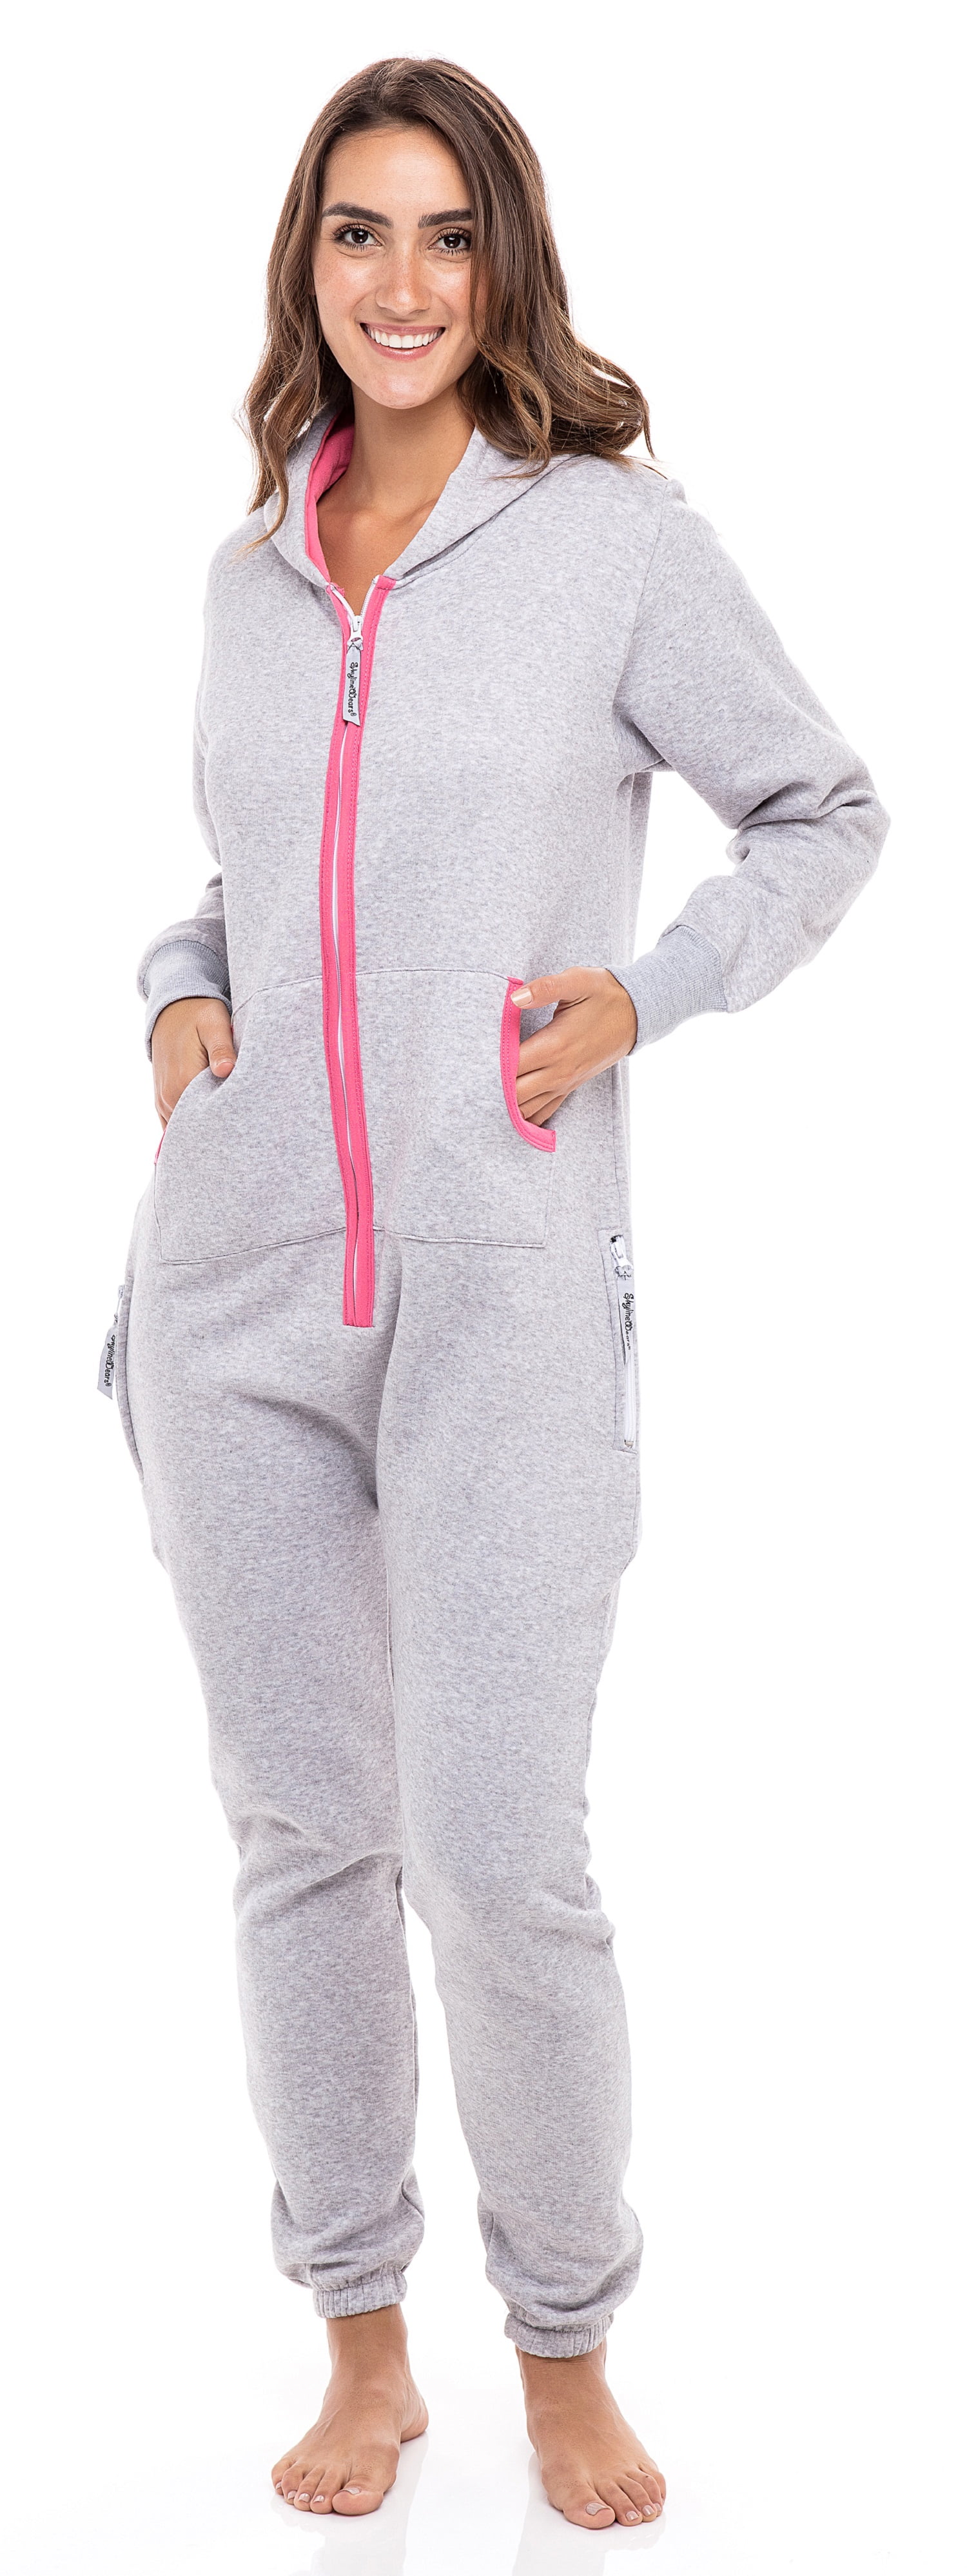 Adult Sleepwear Pajamas For Women S One Piece Non Footed Playsuits